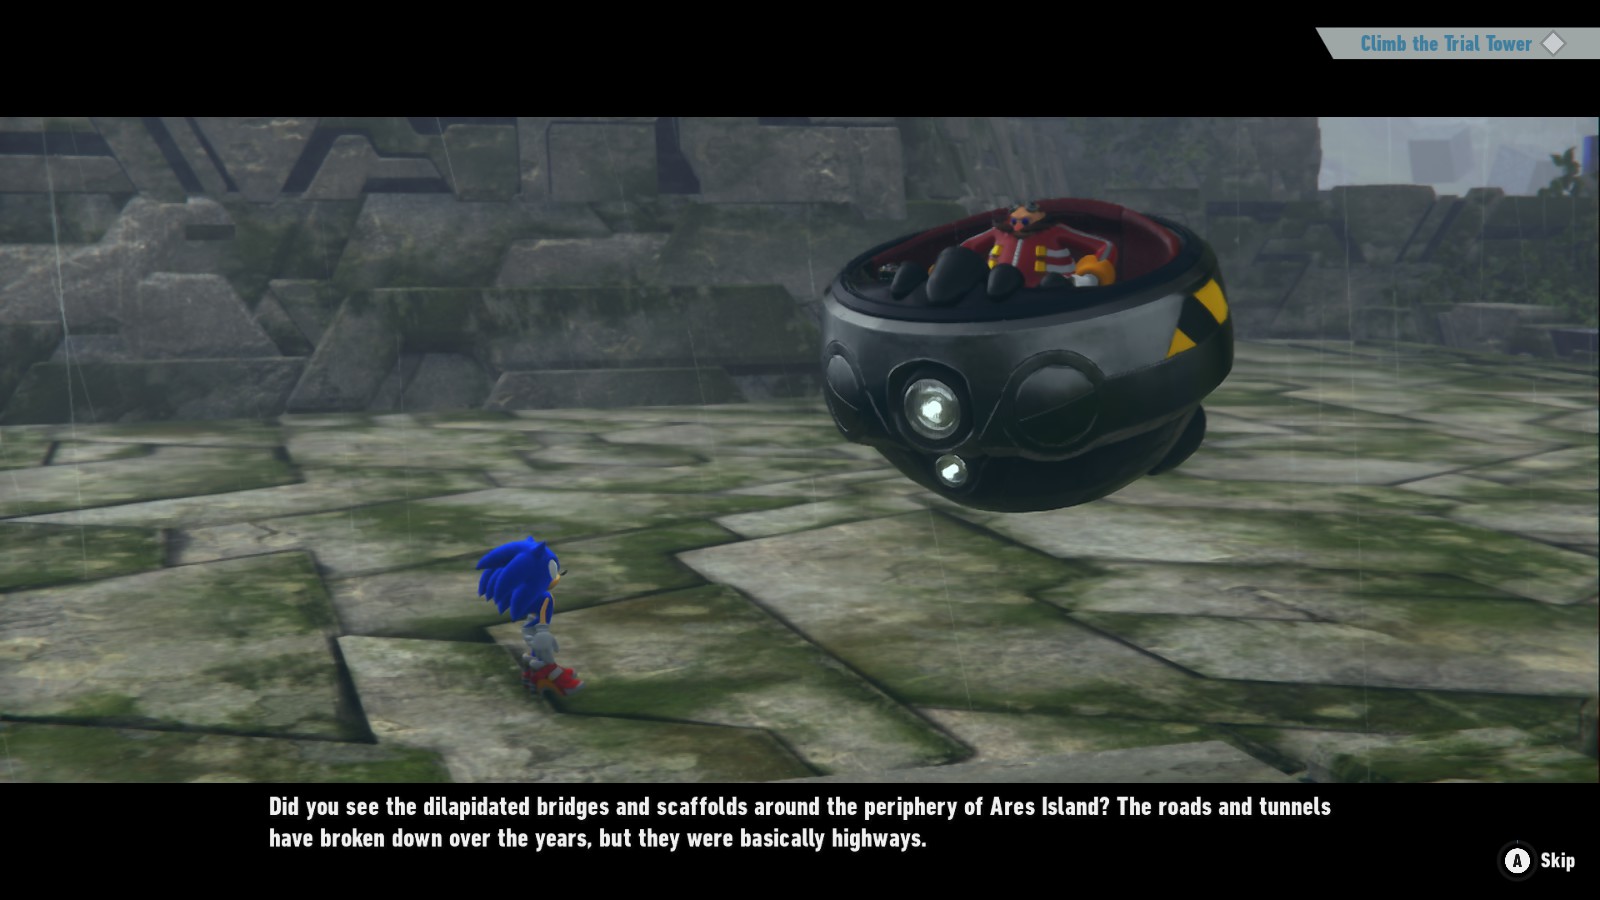 A screenshot of Sonic Frontiers. Eggman in his Eggmobile is talking to Sonic while in some ruins. The subtitle below reads: "Did you see the dilapidated bridges and scaffolds around the periphery of Ares Island? The roads and tunnels have broken down over the years, but they were basically highways"